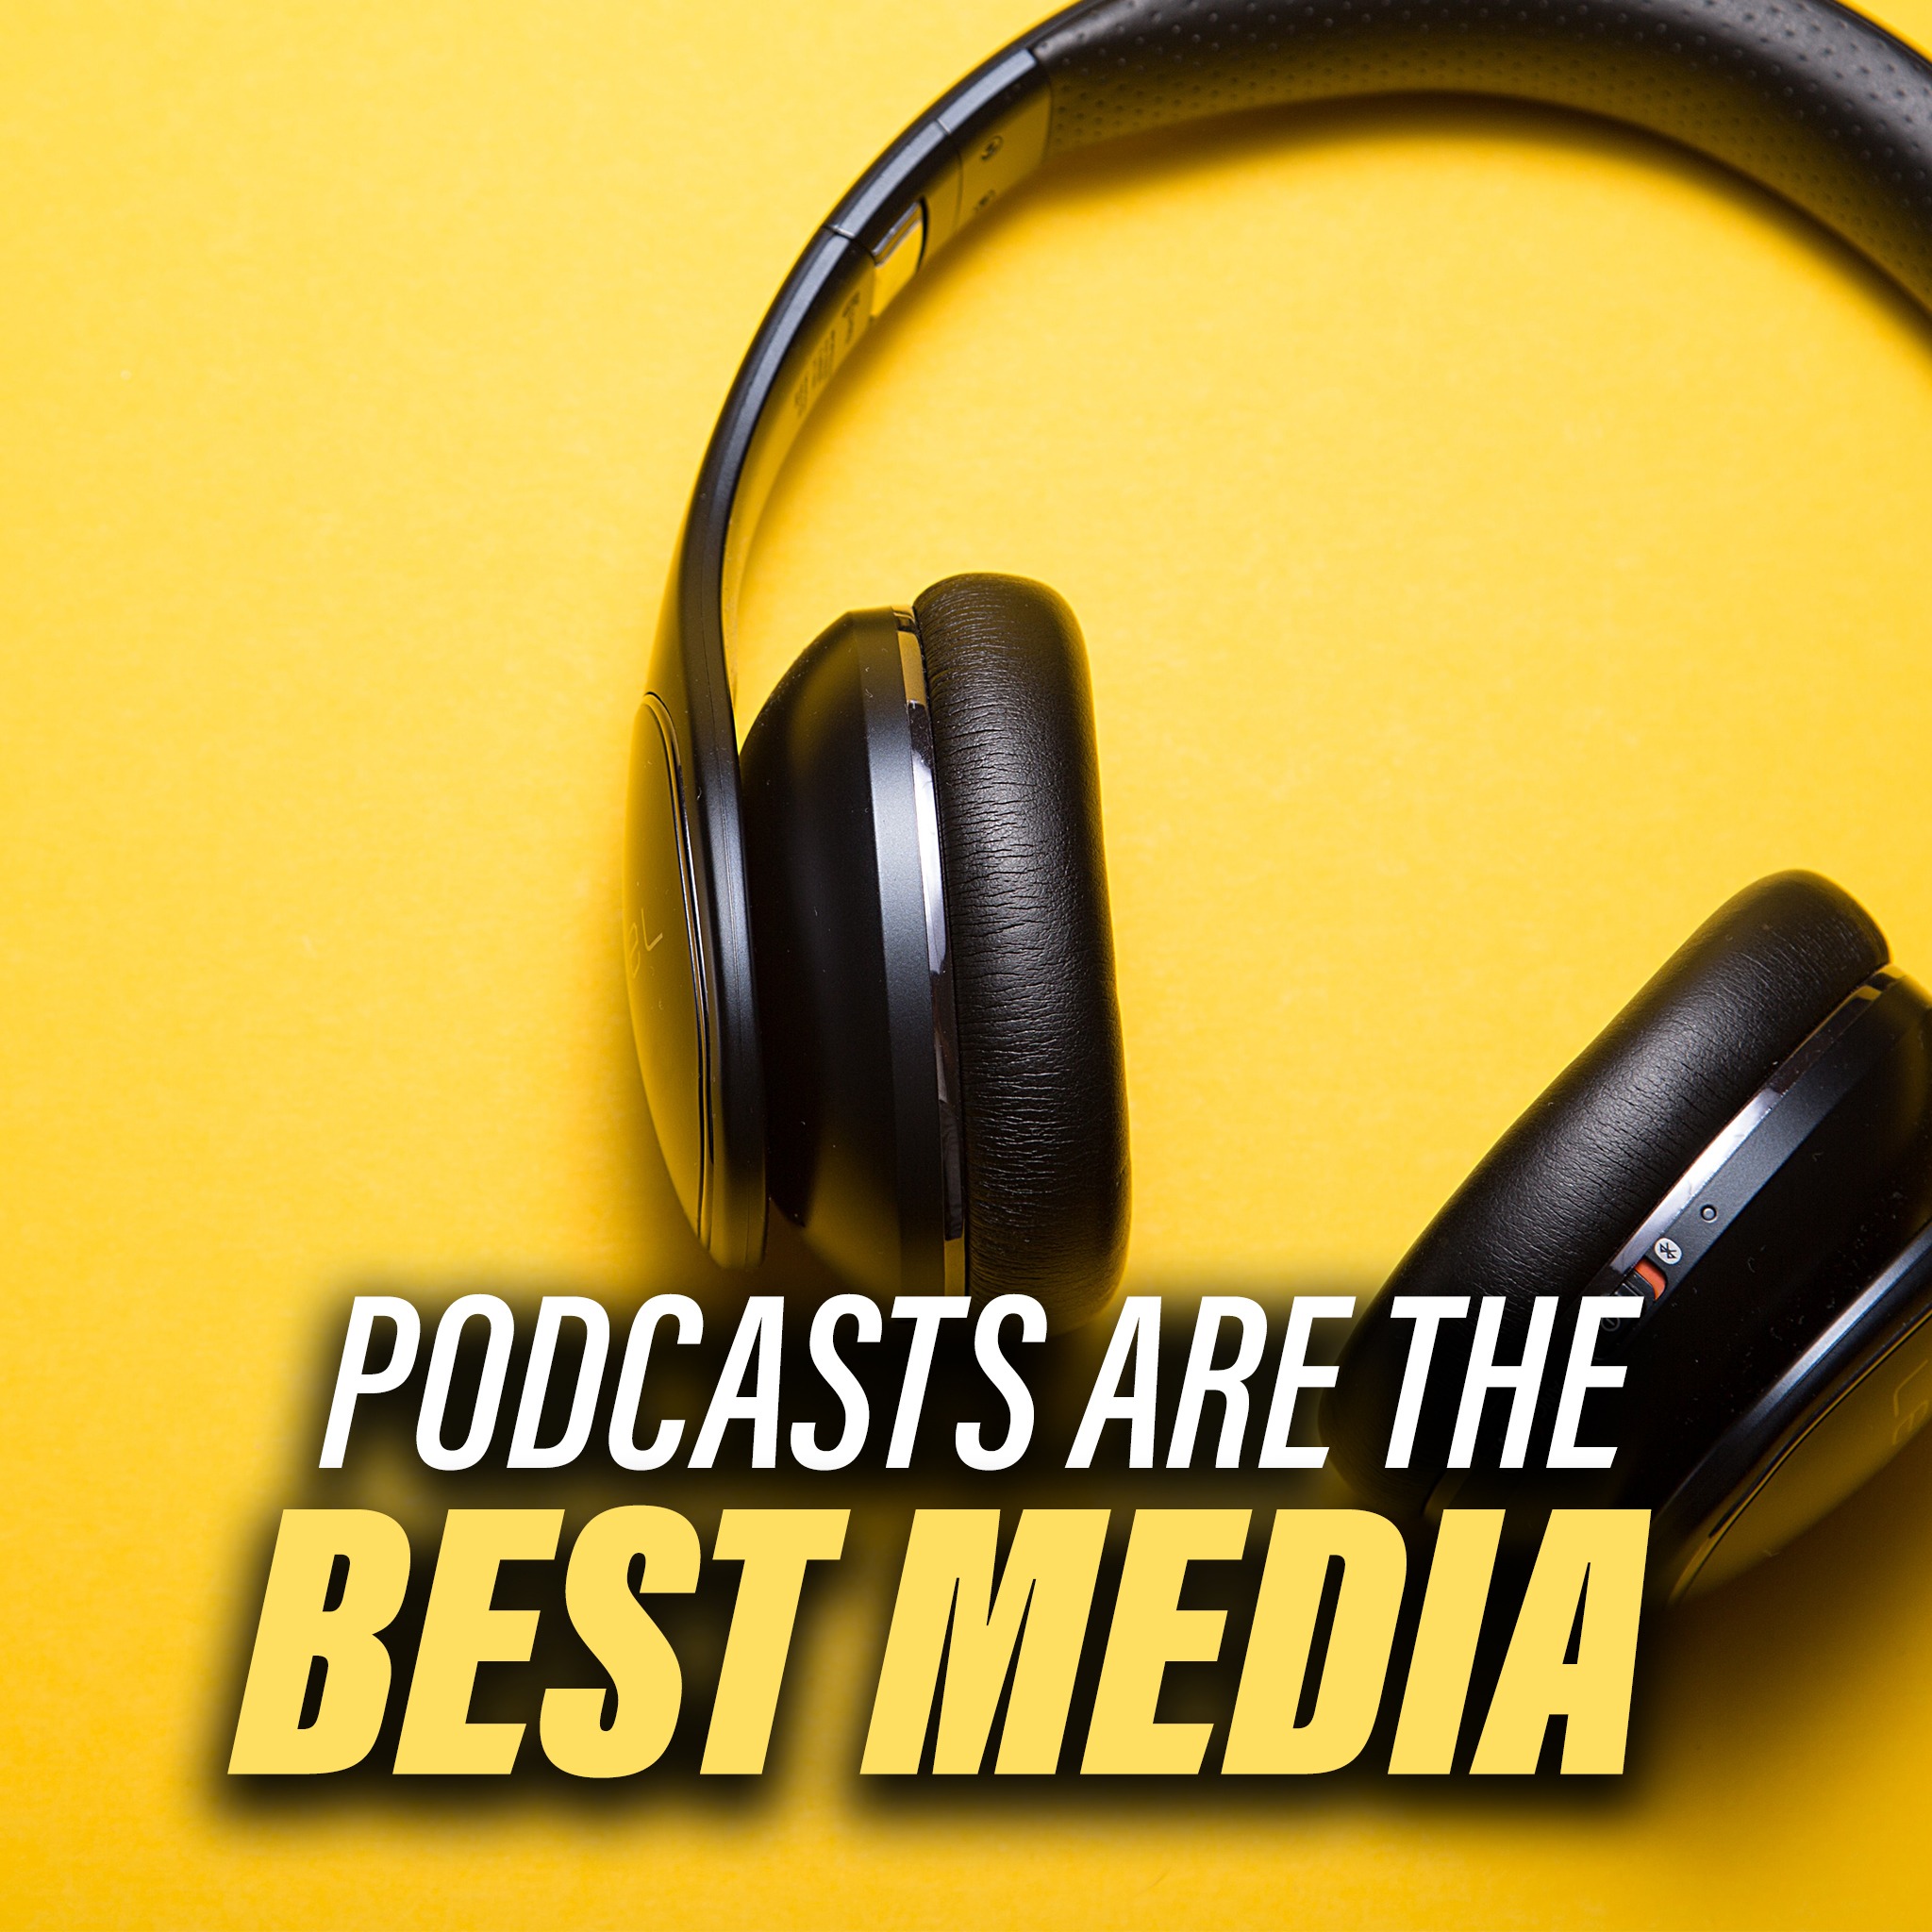 Podcasts are the Best Media